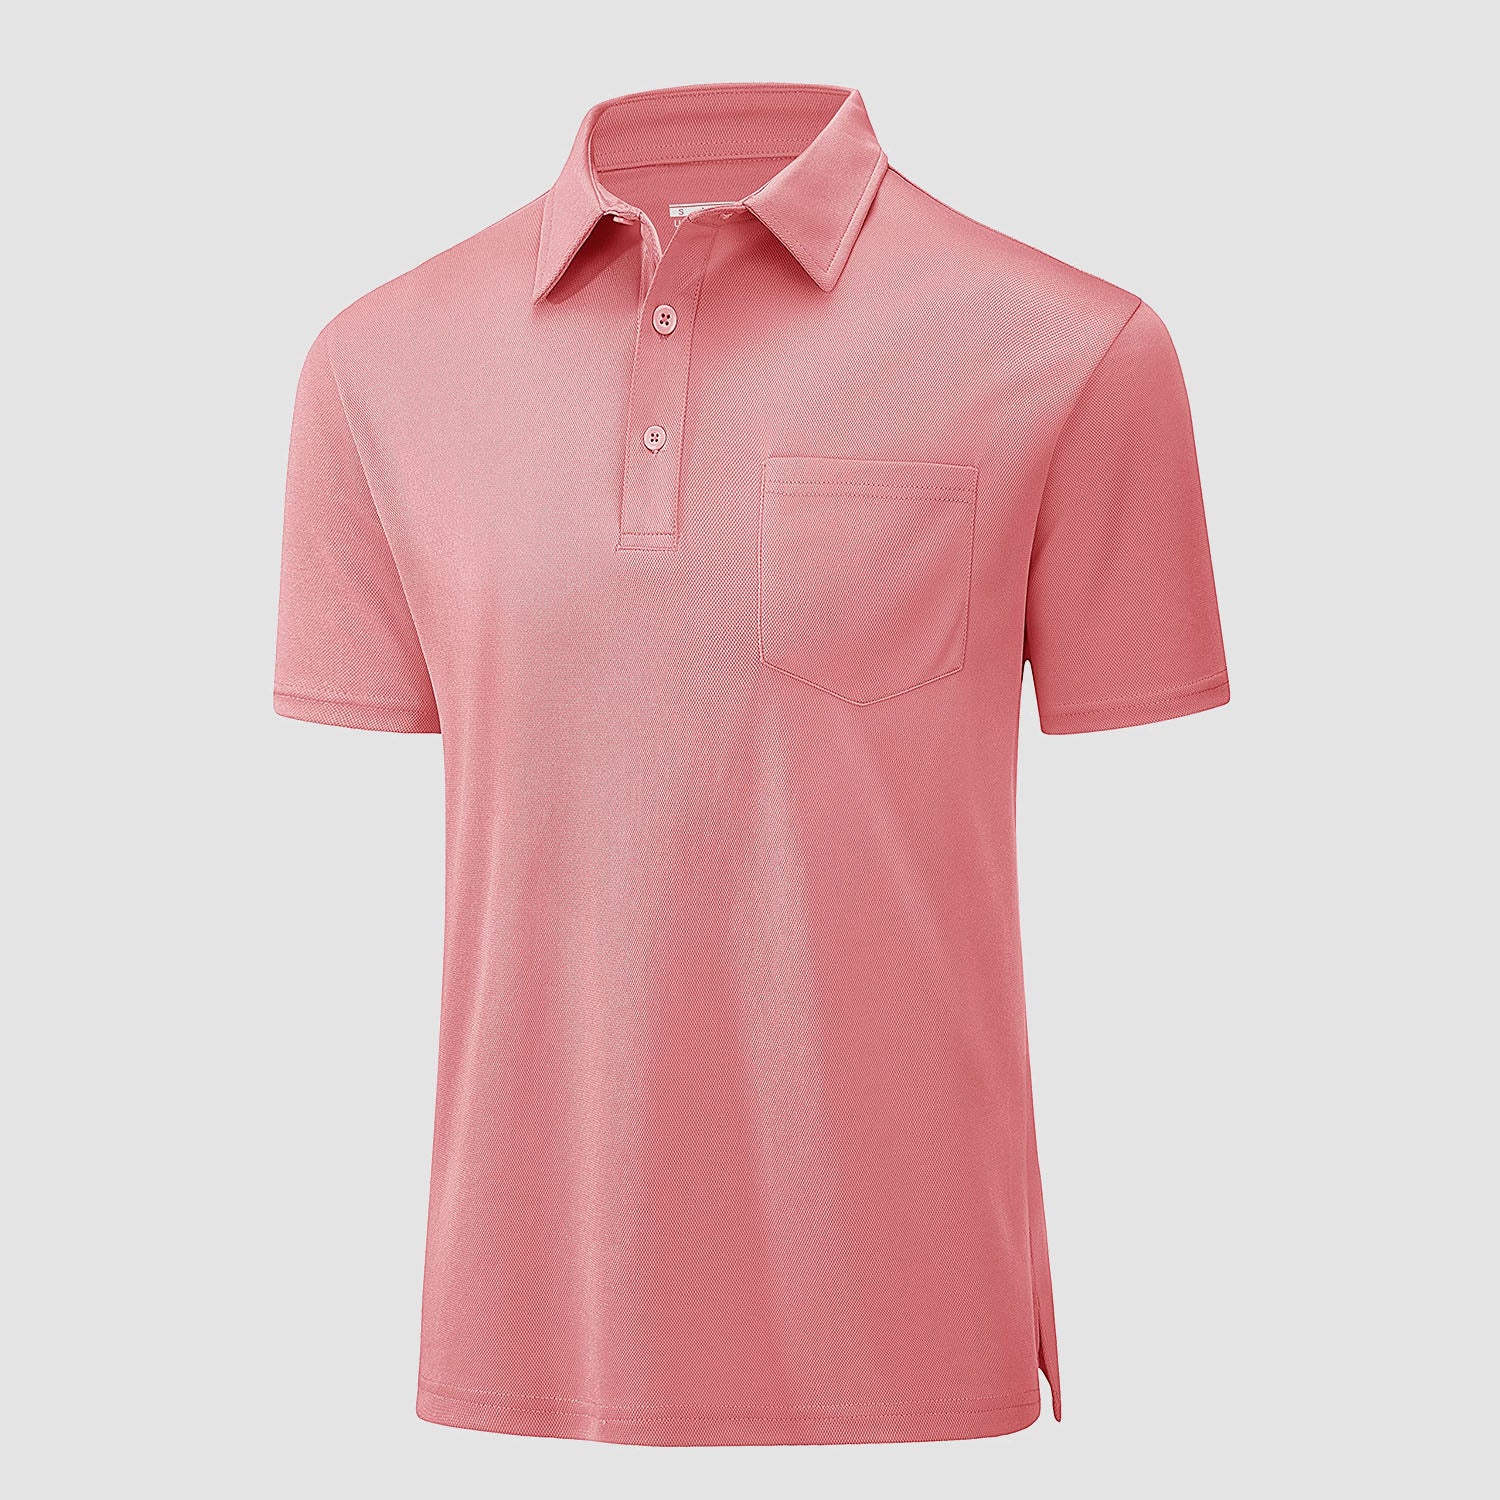 Polo Shirts for Men Short Sleeve  Golf Shirts Quick Dry with Pocket